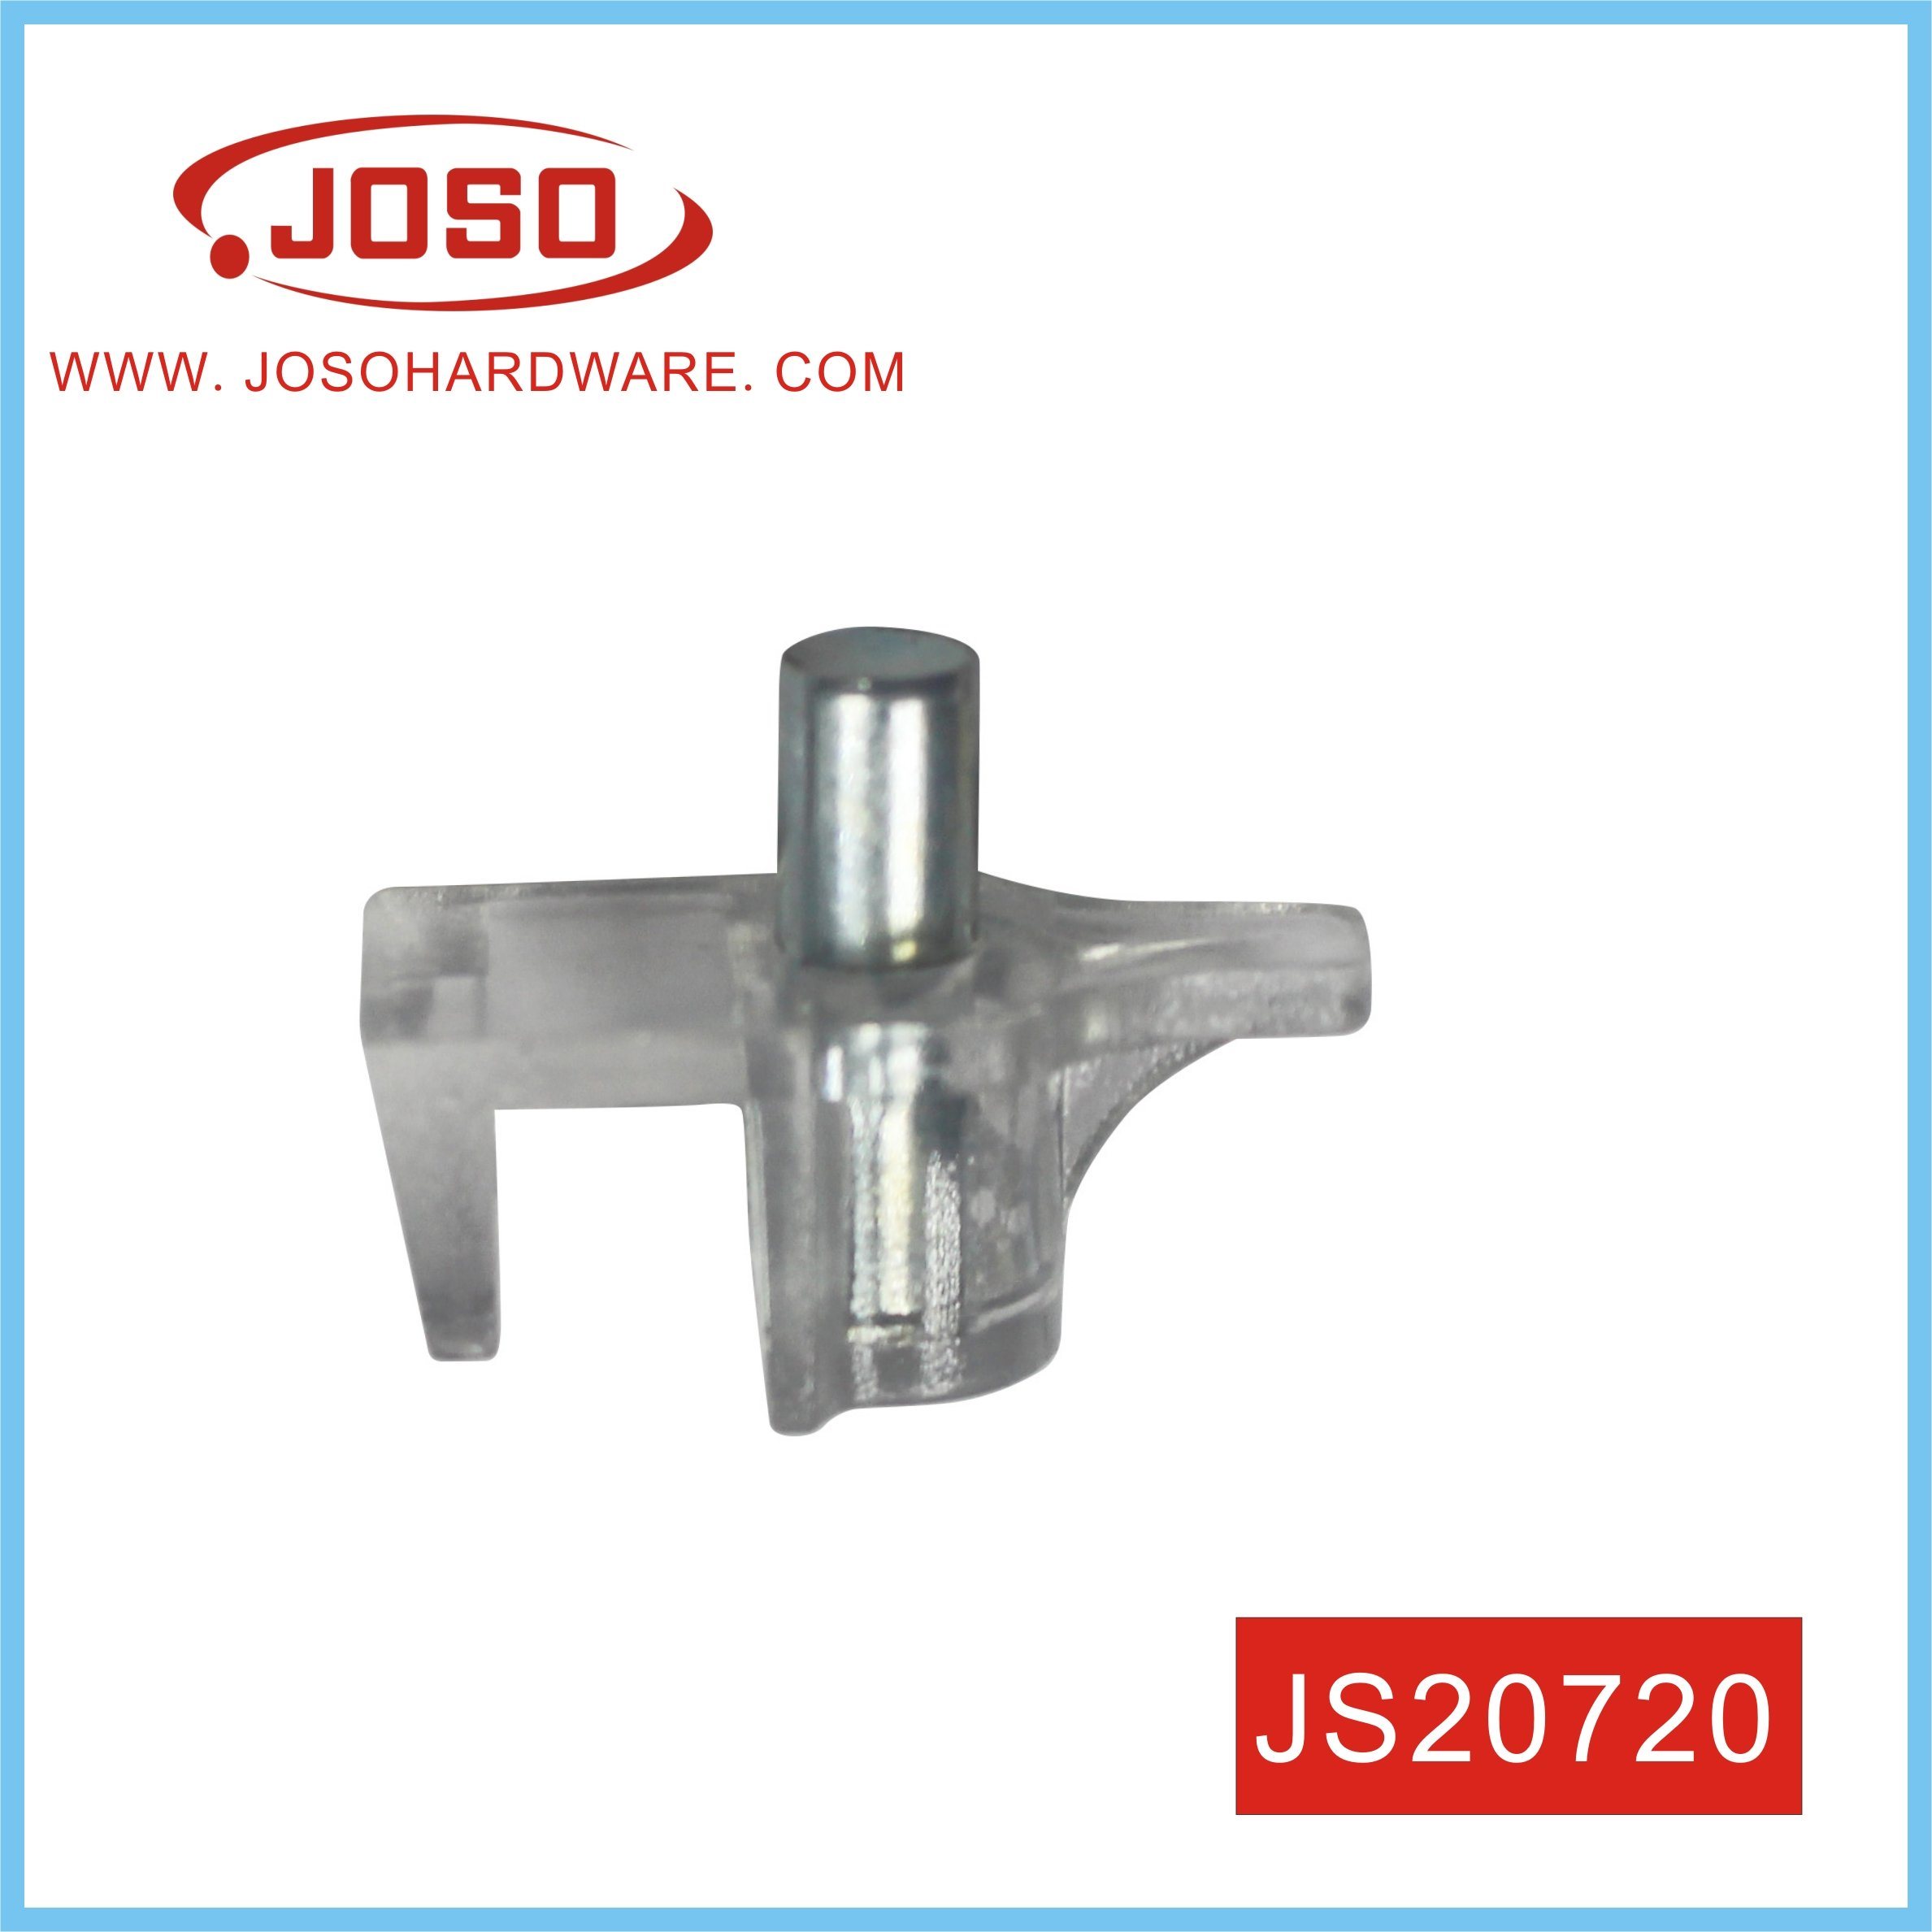 Hight Quality Shelf Support Stud Peg Clear Plastic for Cabinet